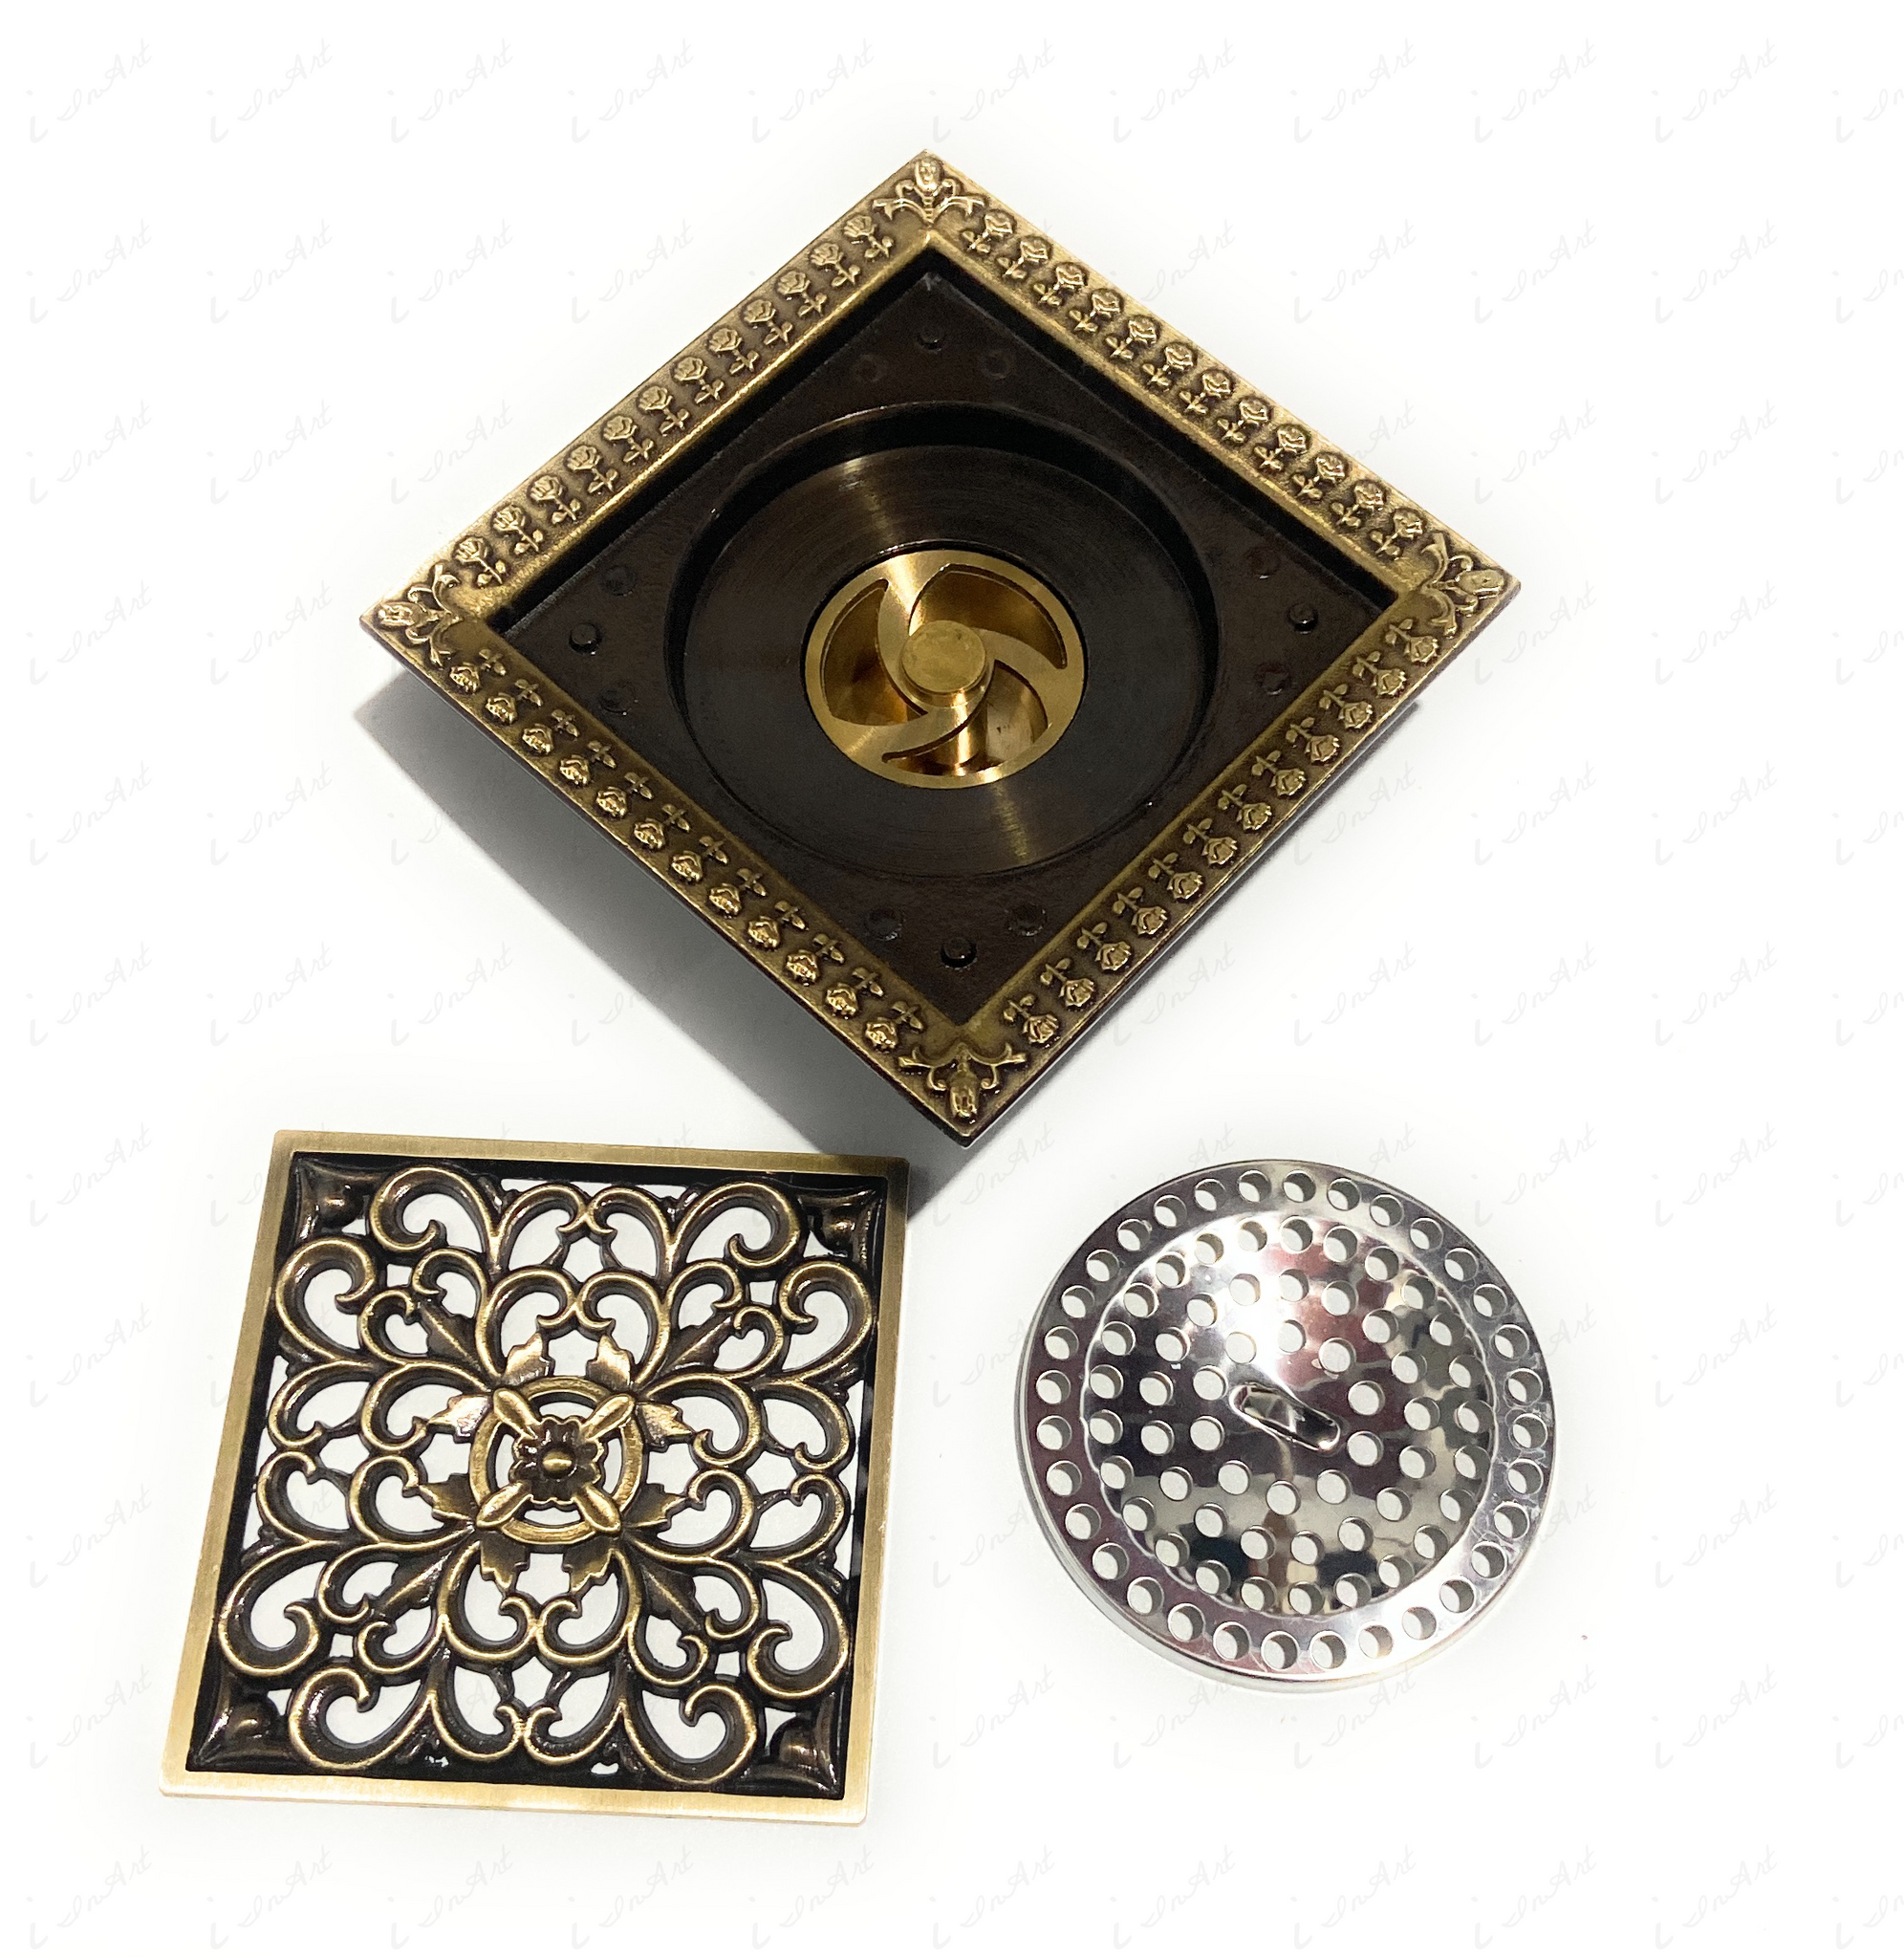 InArt Brass Square Shower Floor Drain with Removable Cover Grid Grate 5 inch Long Antique Finish Floral Pattern